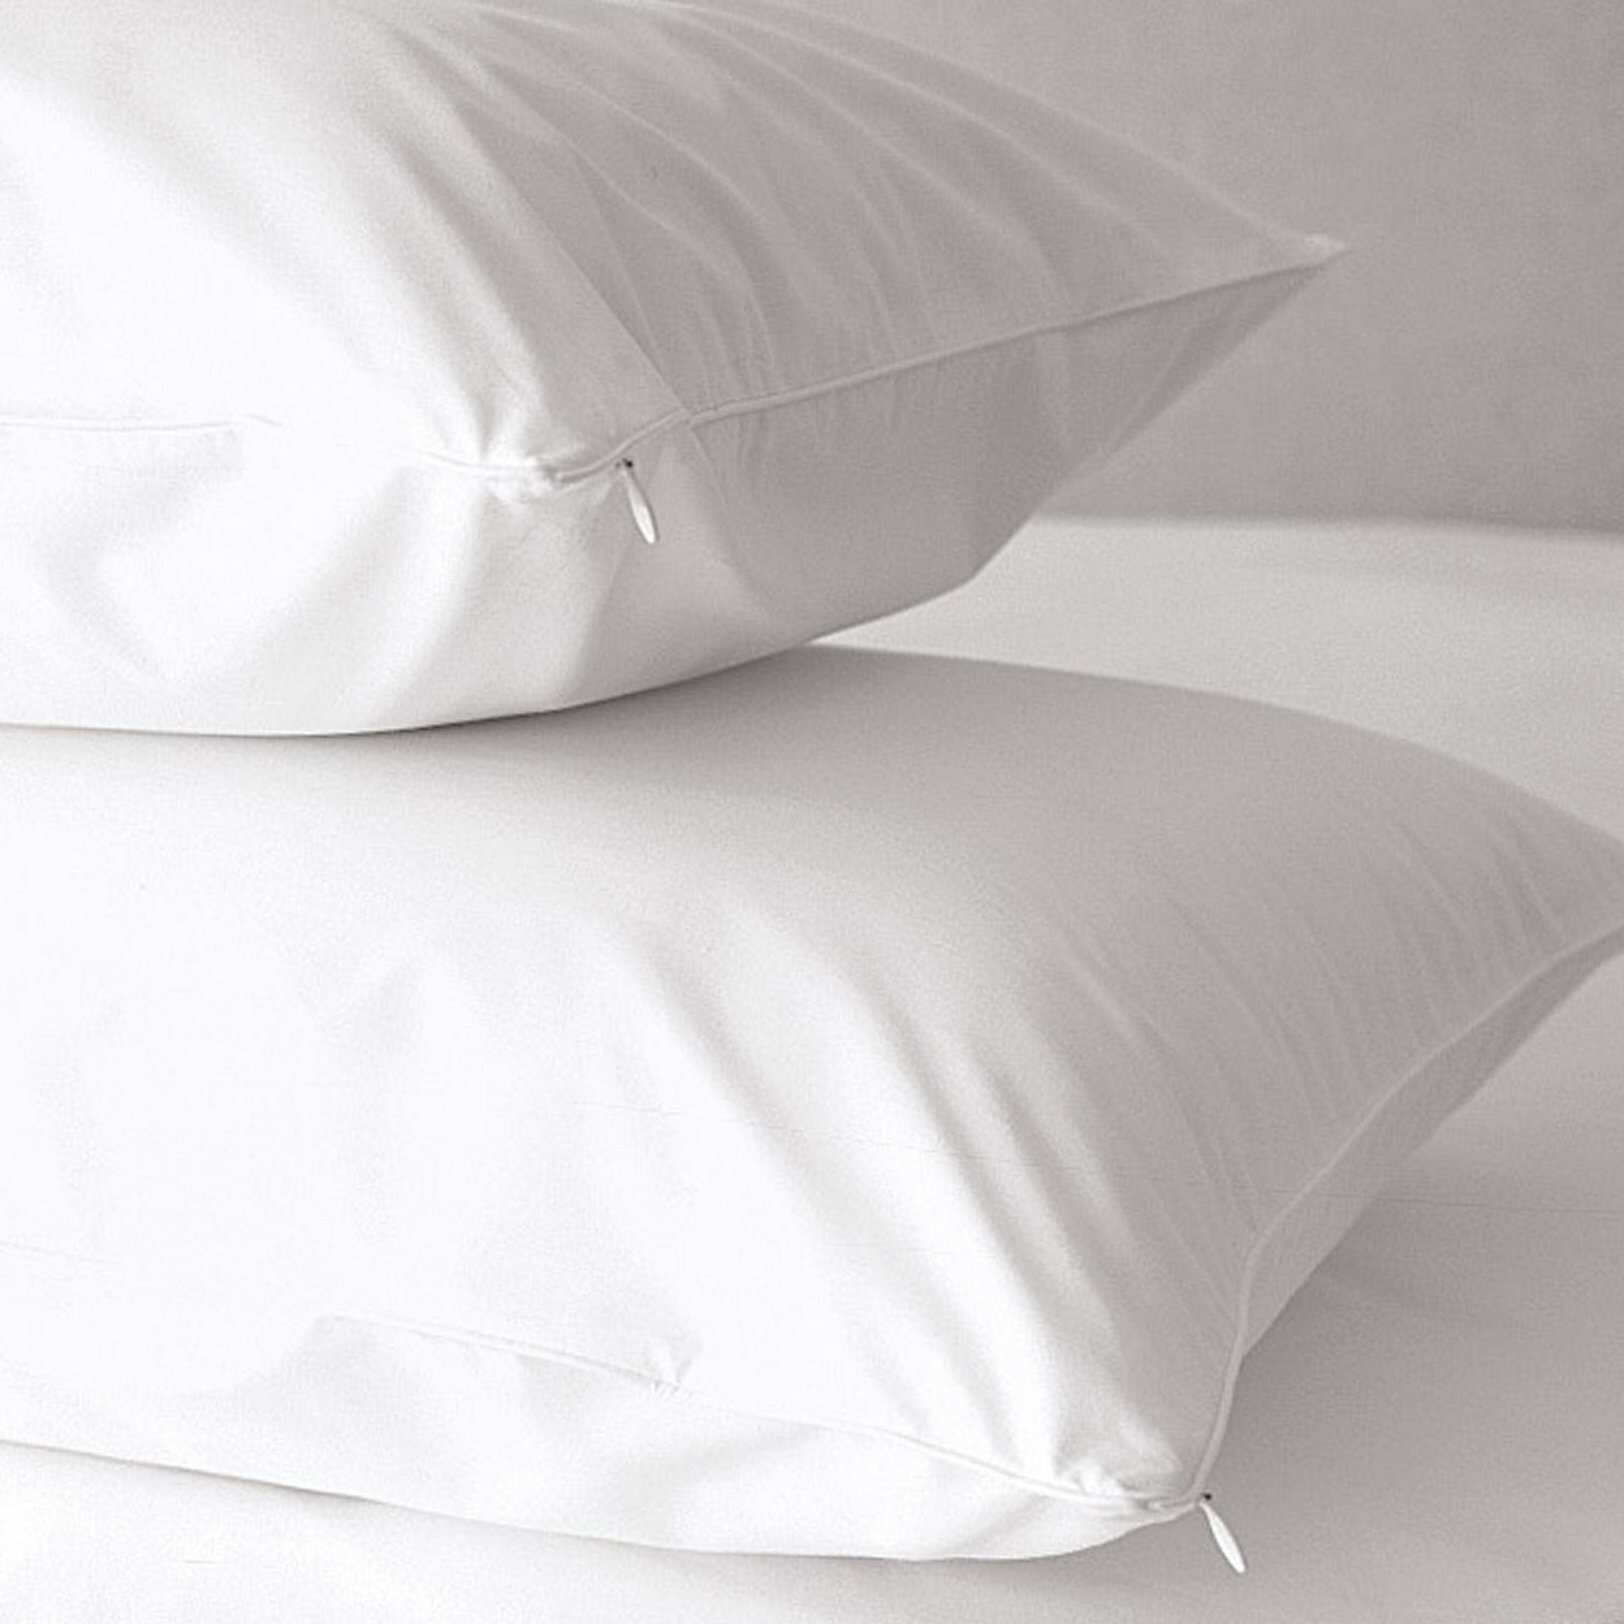 OSleep 300 Thread Count Cotton Hypoallergenic White Pillow Protector (Set of 8)